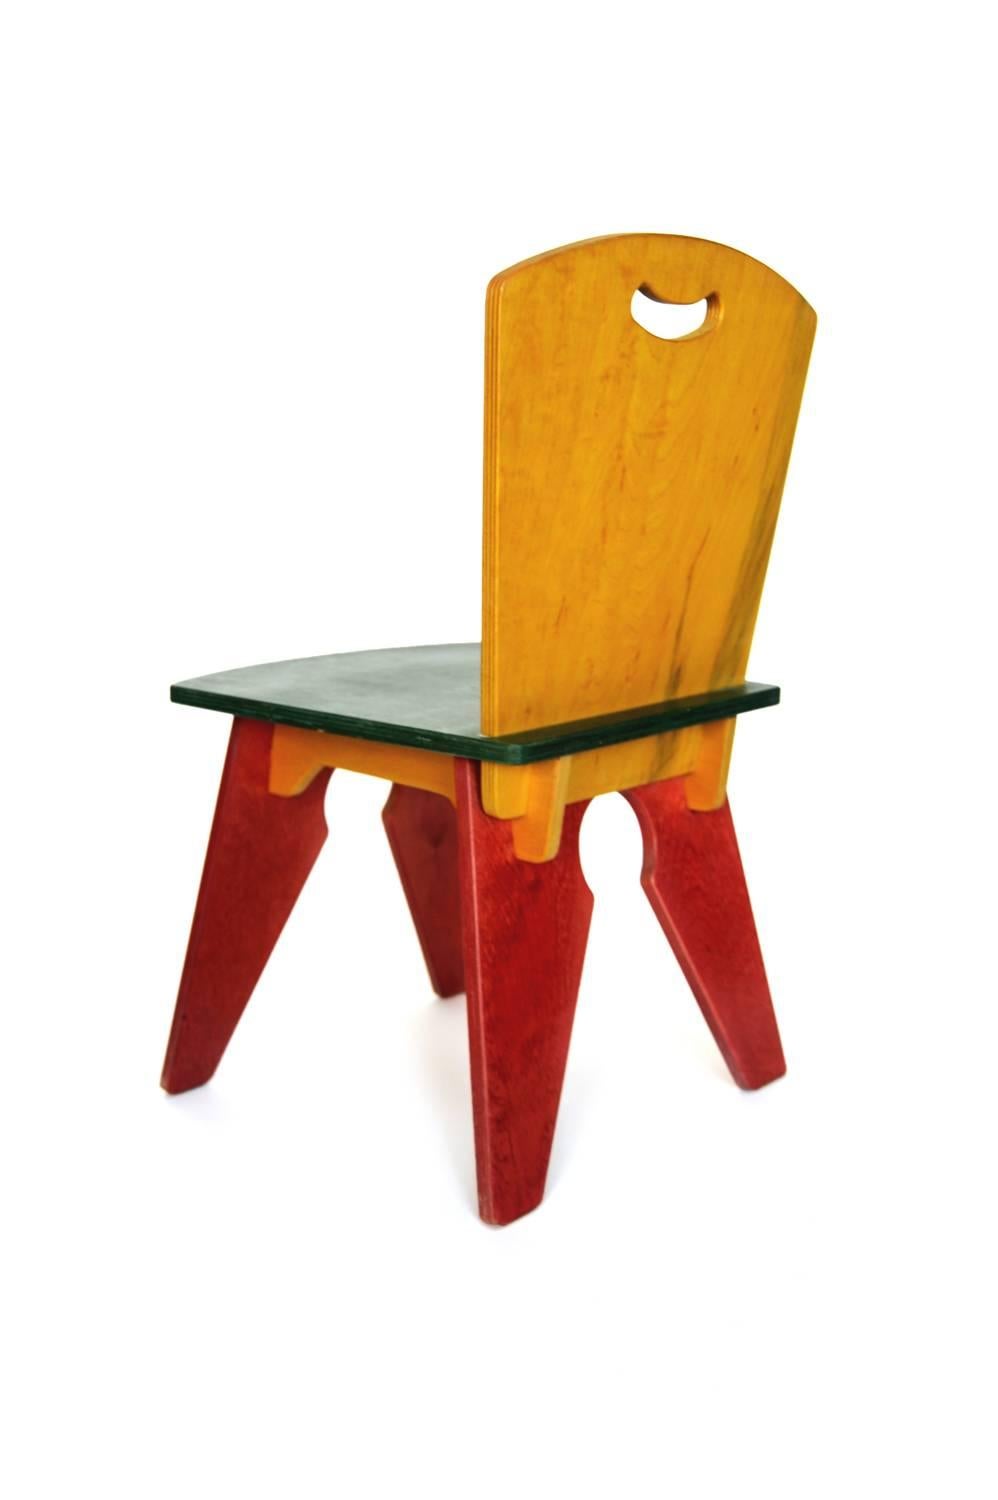 Red Yellow Green Notch Chair, USA, 1980s

Vintage, USA, 1980s
Painted Solid Wood
H 22.5 in, W 13 in, D 12 in (seat: H 12 in)

From a private child chair collection